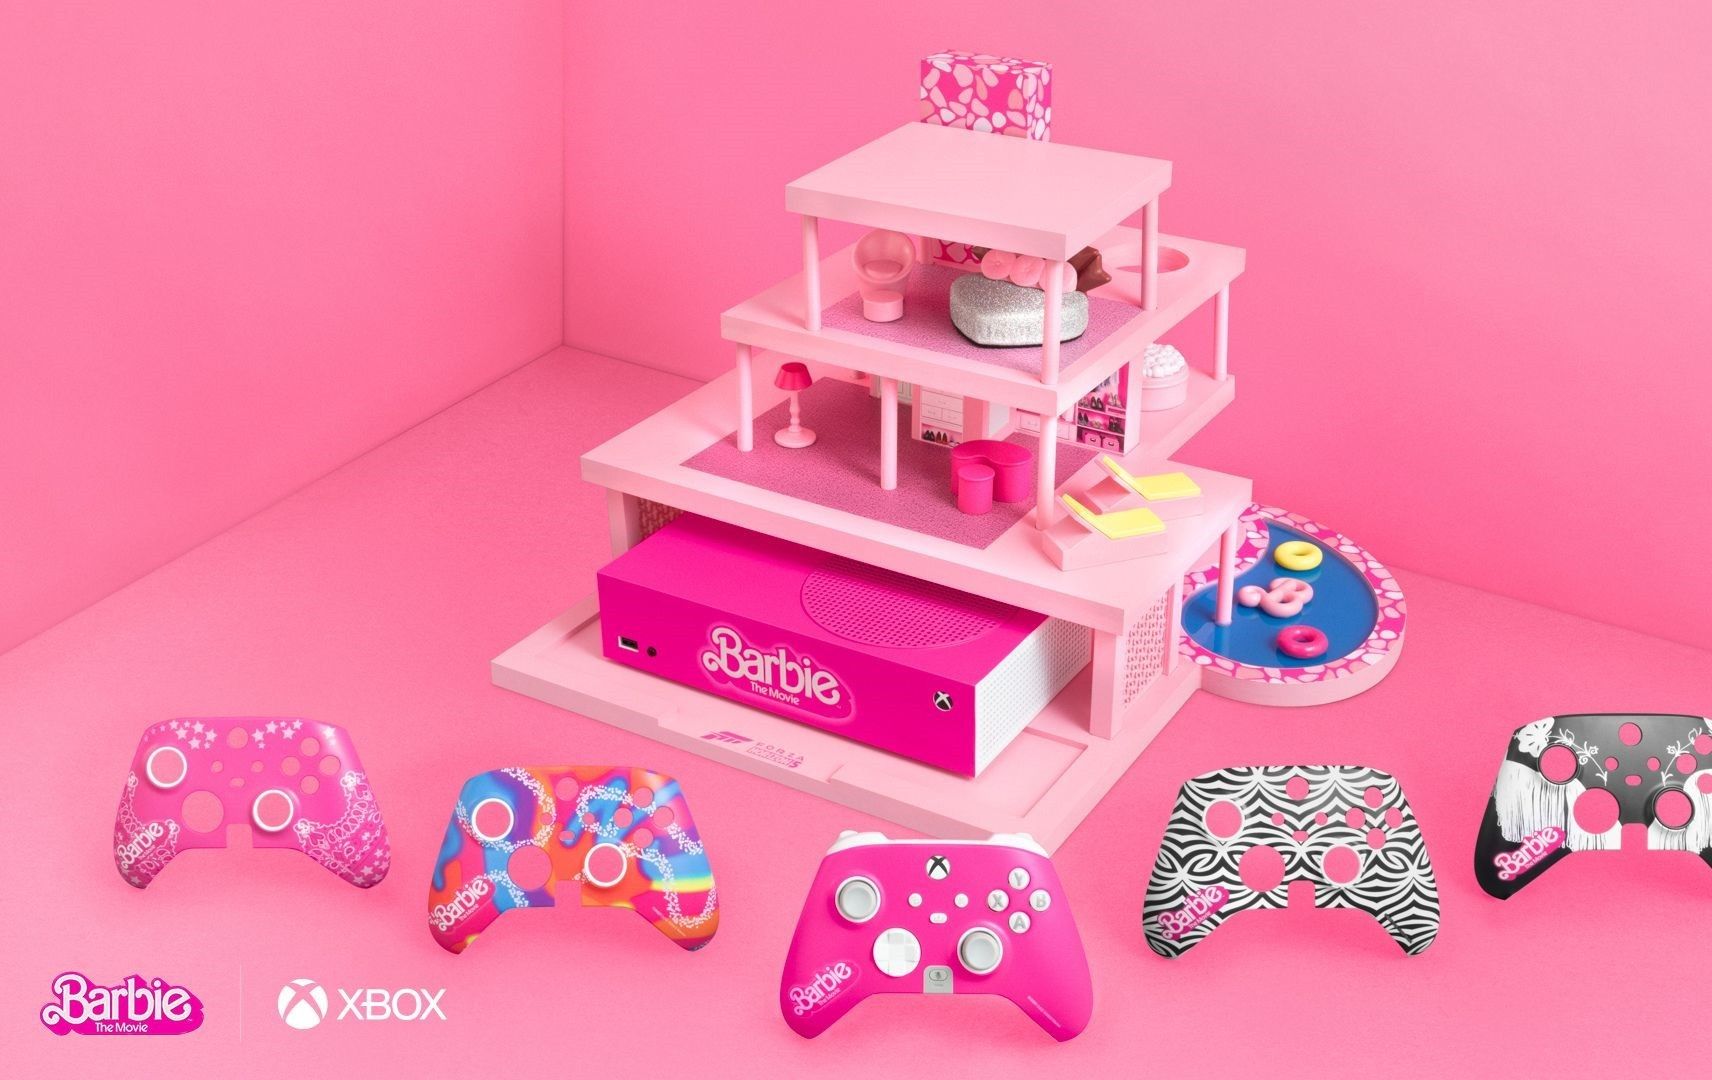 ‘This Barbie is a gamer!’: Xbox goes into Barbie mode for special series thumbnail